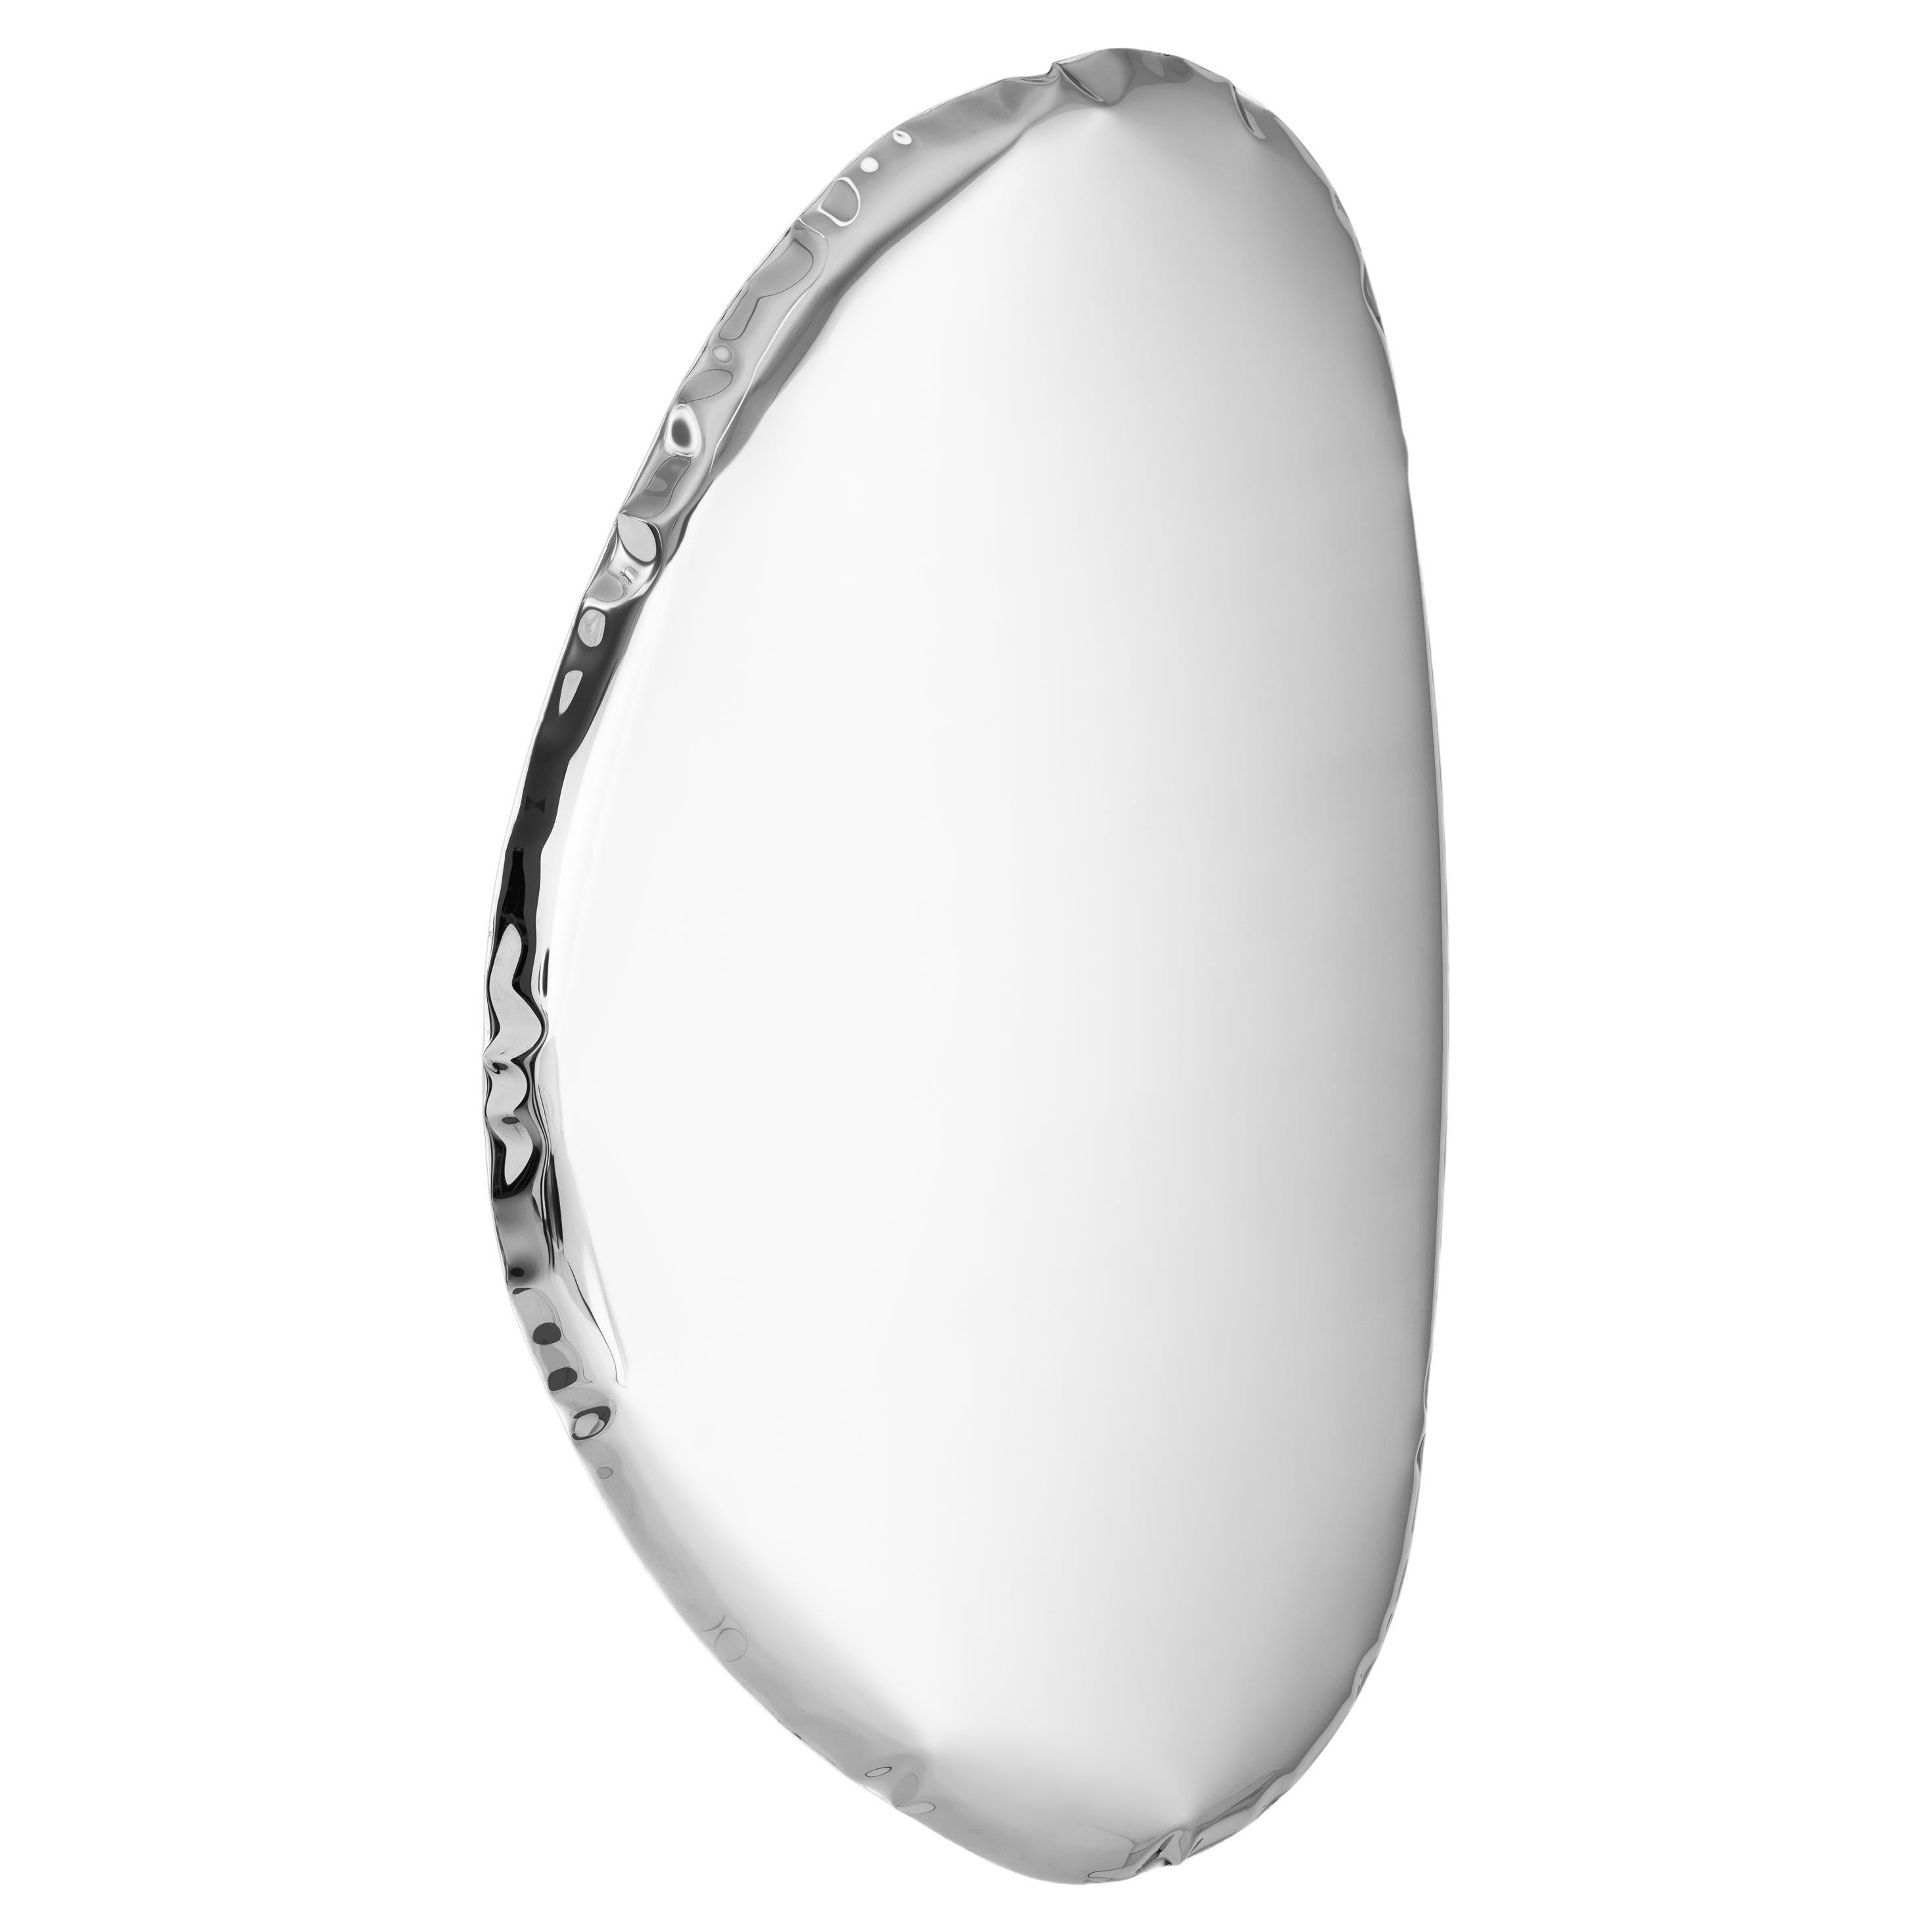 In Stock Tafla O3 Polished Stainless Steel Wall Mirror by Zieta